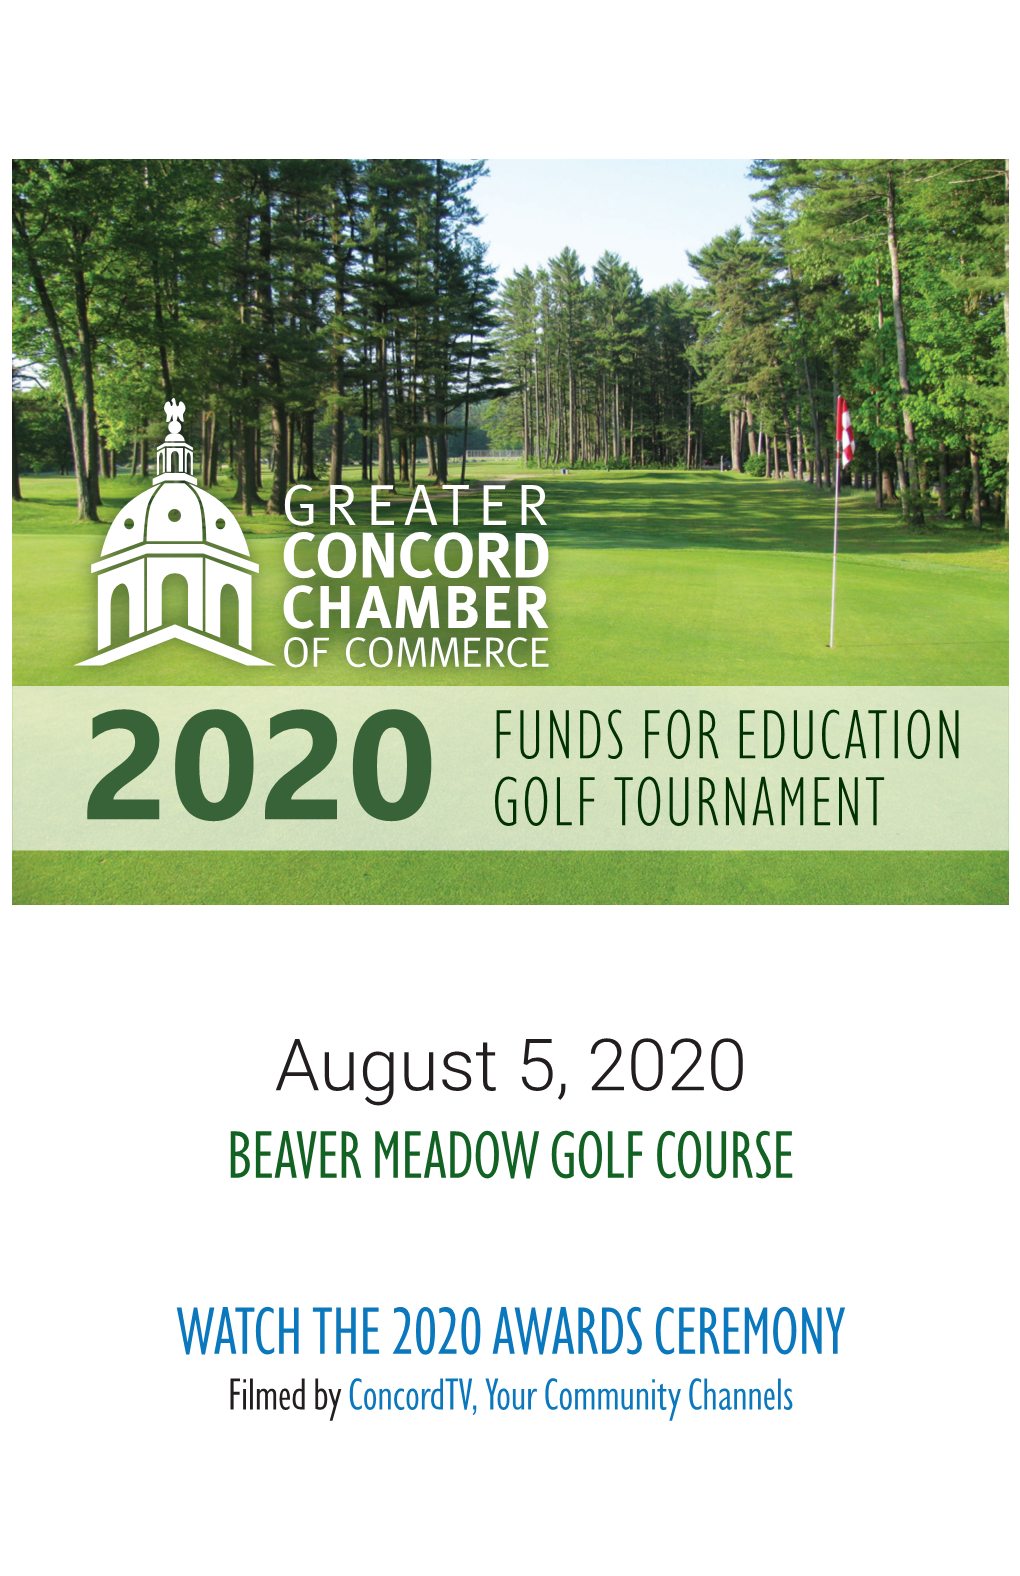 August 5, 2020 2020 FUNDS for EDUCATION GOLF TOURNAMENT